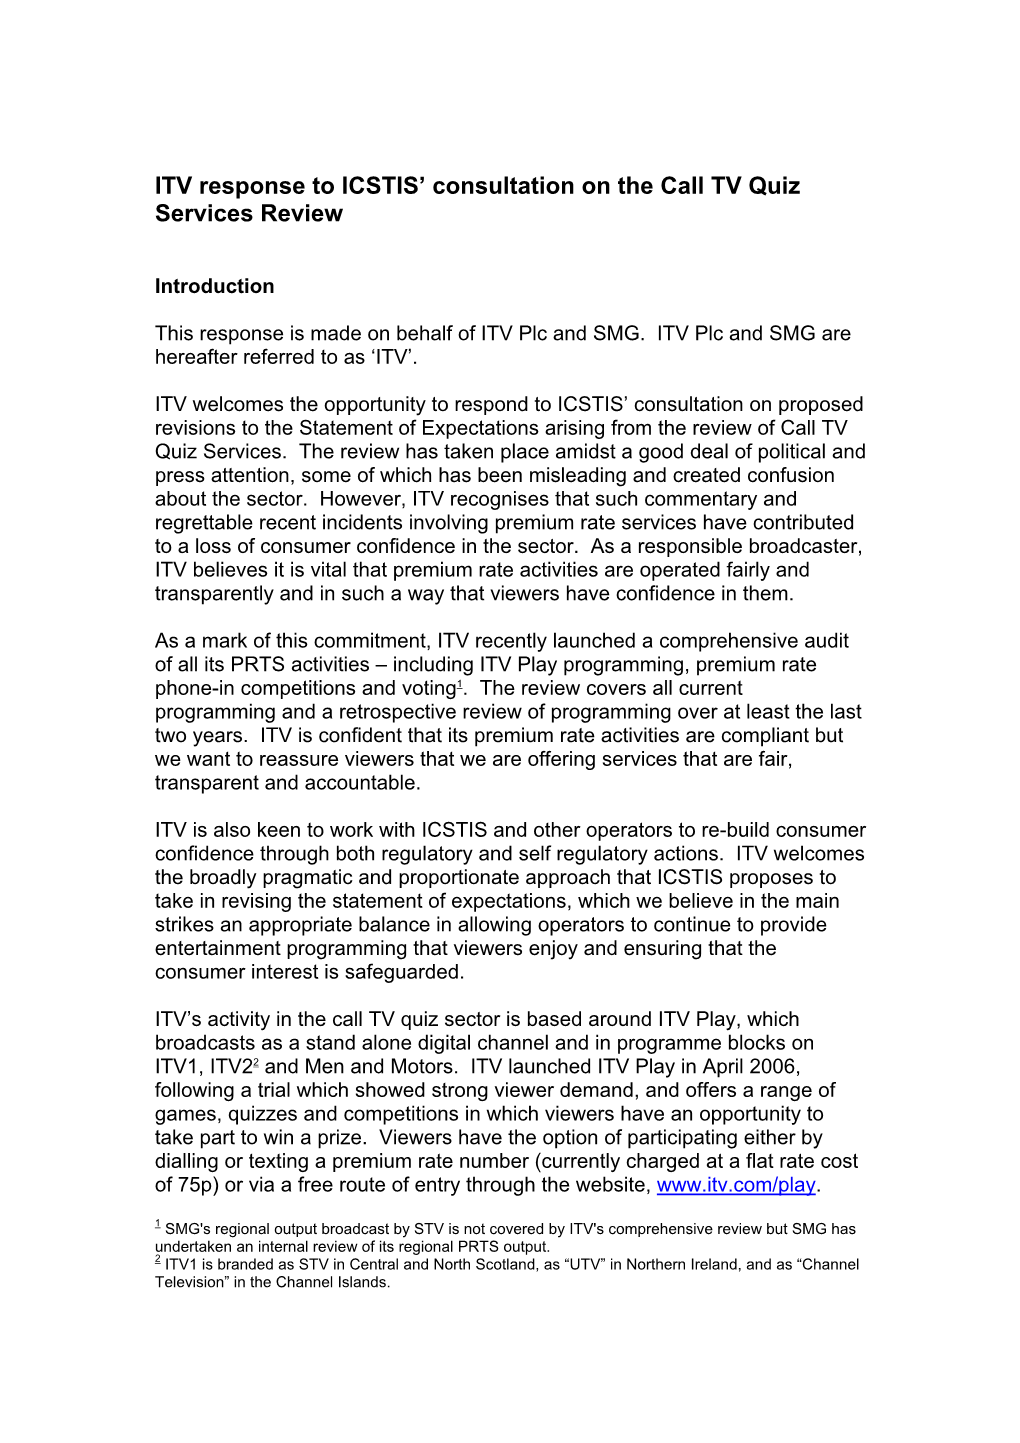 ITV Response to ICSTIS’ Consultation on the Call TV Quiz Services Review